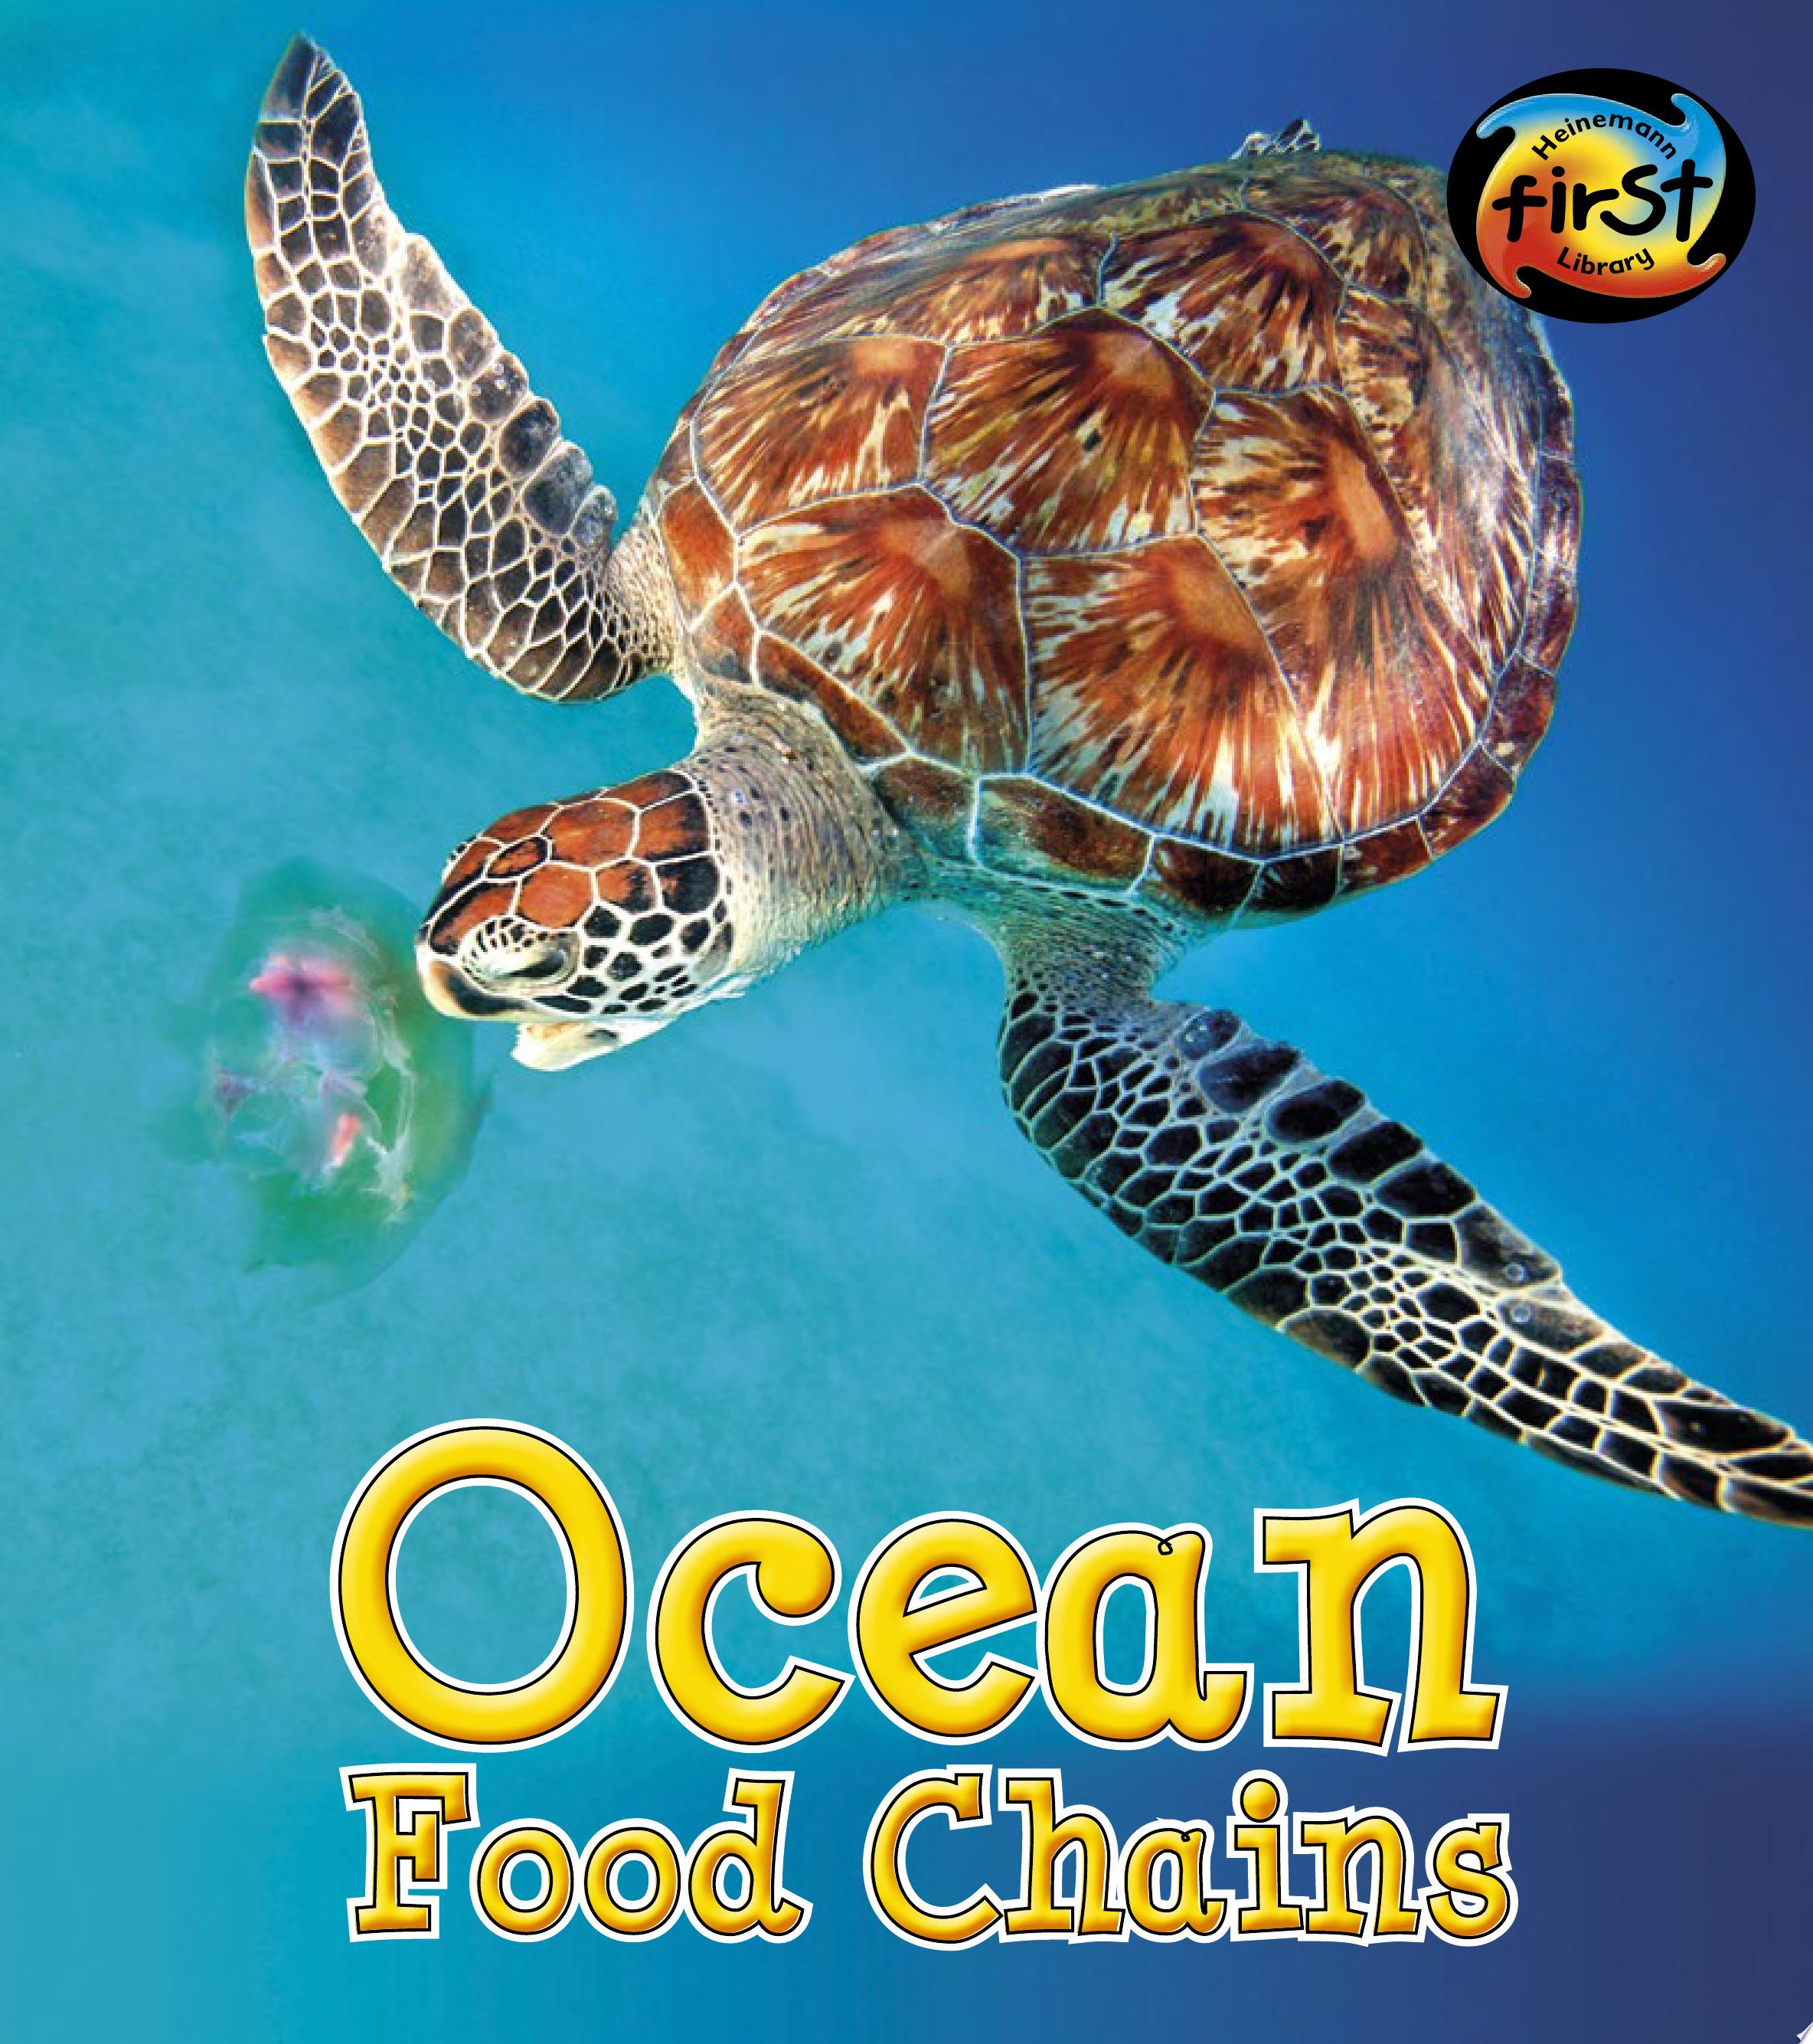 Image for "Ocean Food Chains"